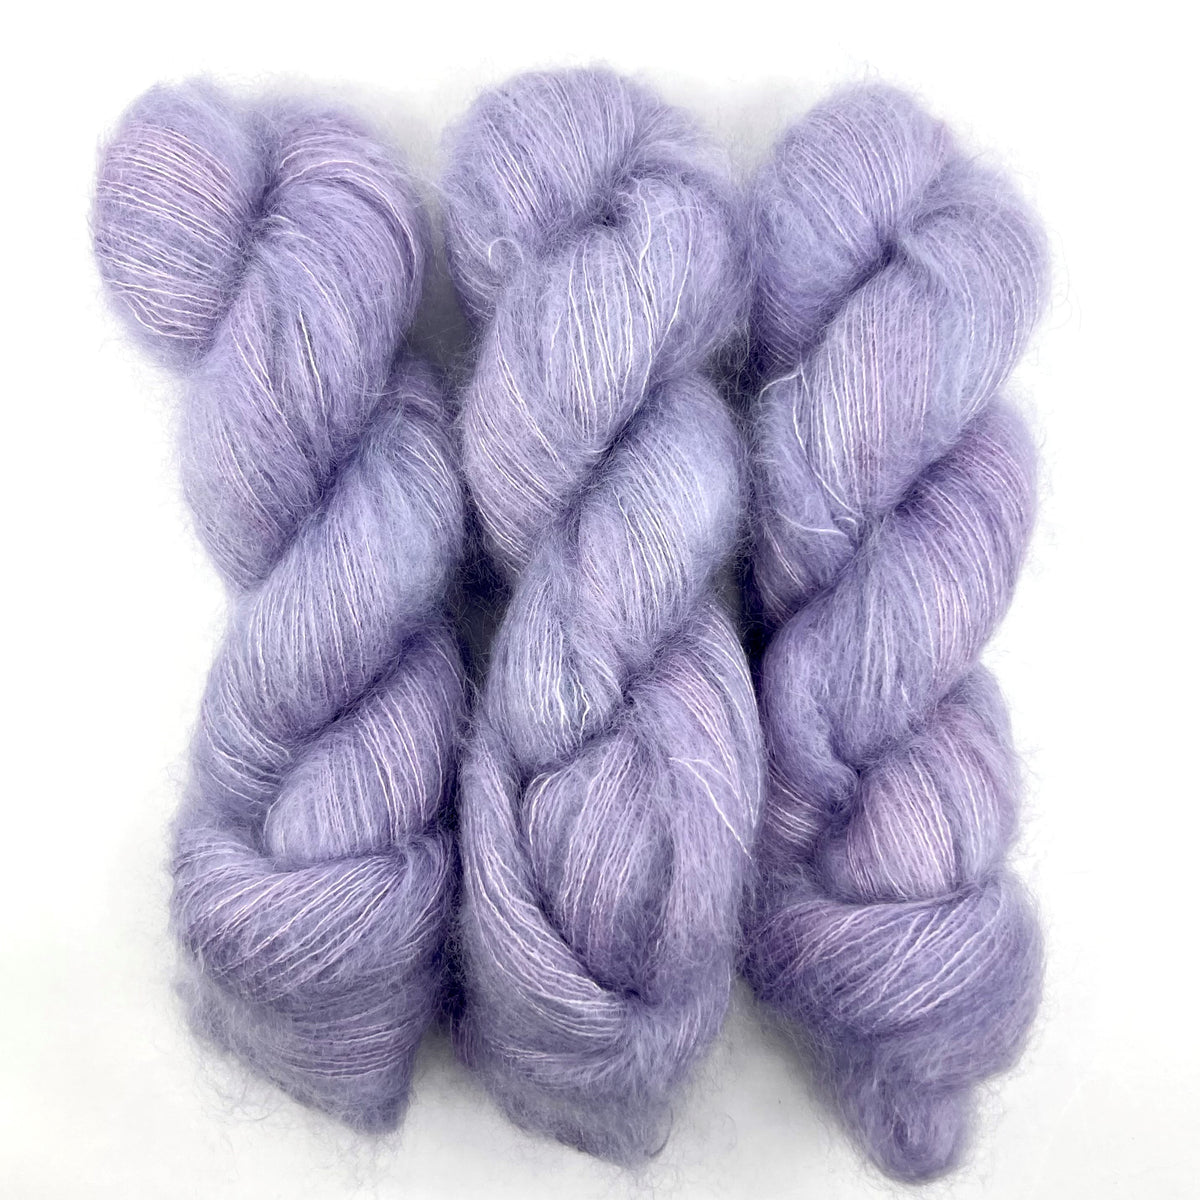 English Lavender - Delicacy Lace - Dyed Stock